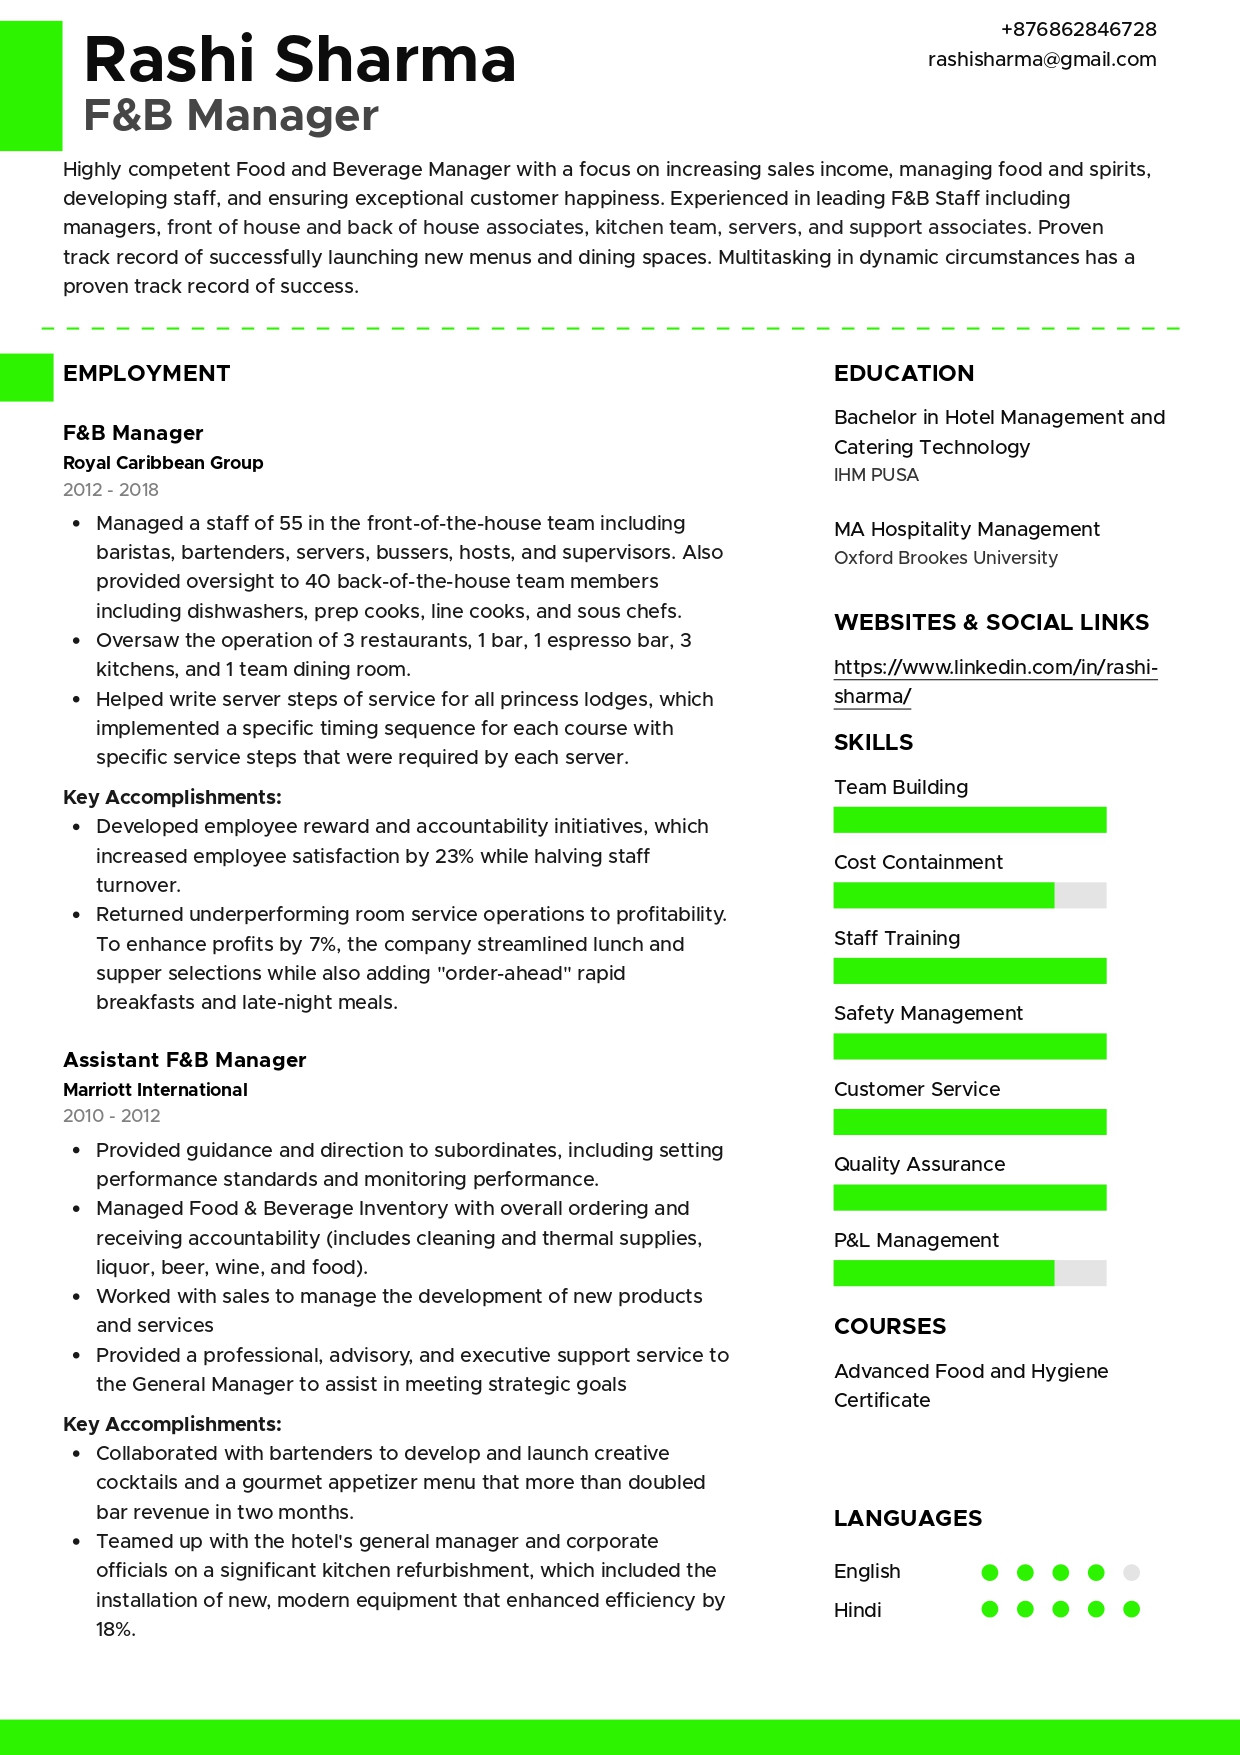 Food and Beverage Operations Manager Resume Sample Sample Resume Of F&b Manager with Template & Writing Guide …